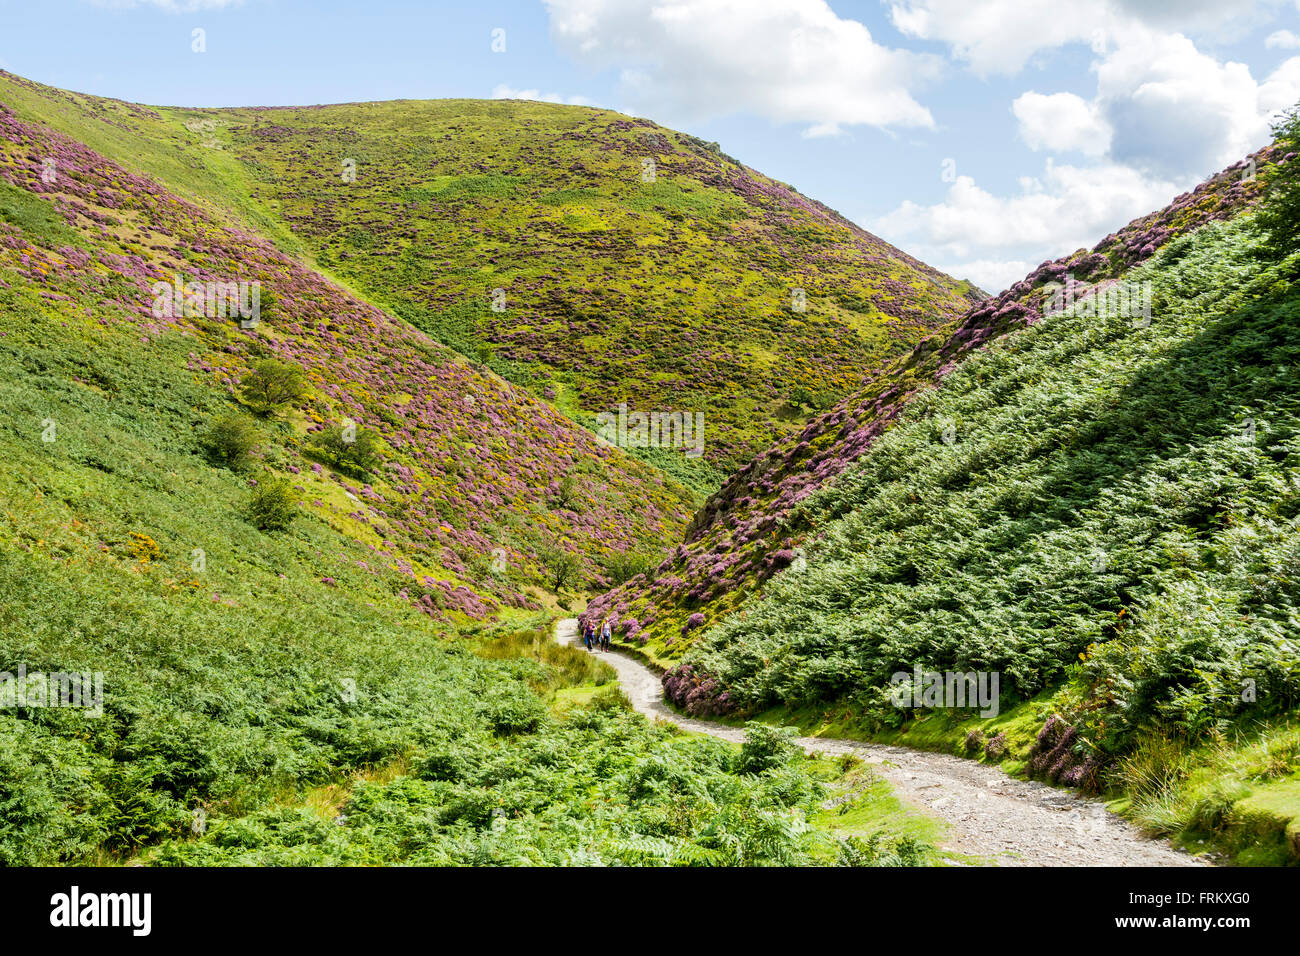 Walkers in the Carding Mill Valley, on the Long Mynd ridge, near Church Stretton, Shropshire, England, UK Stock Photo